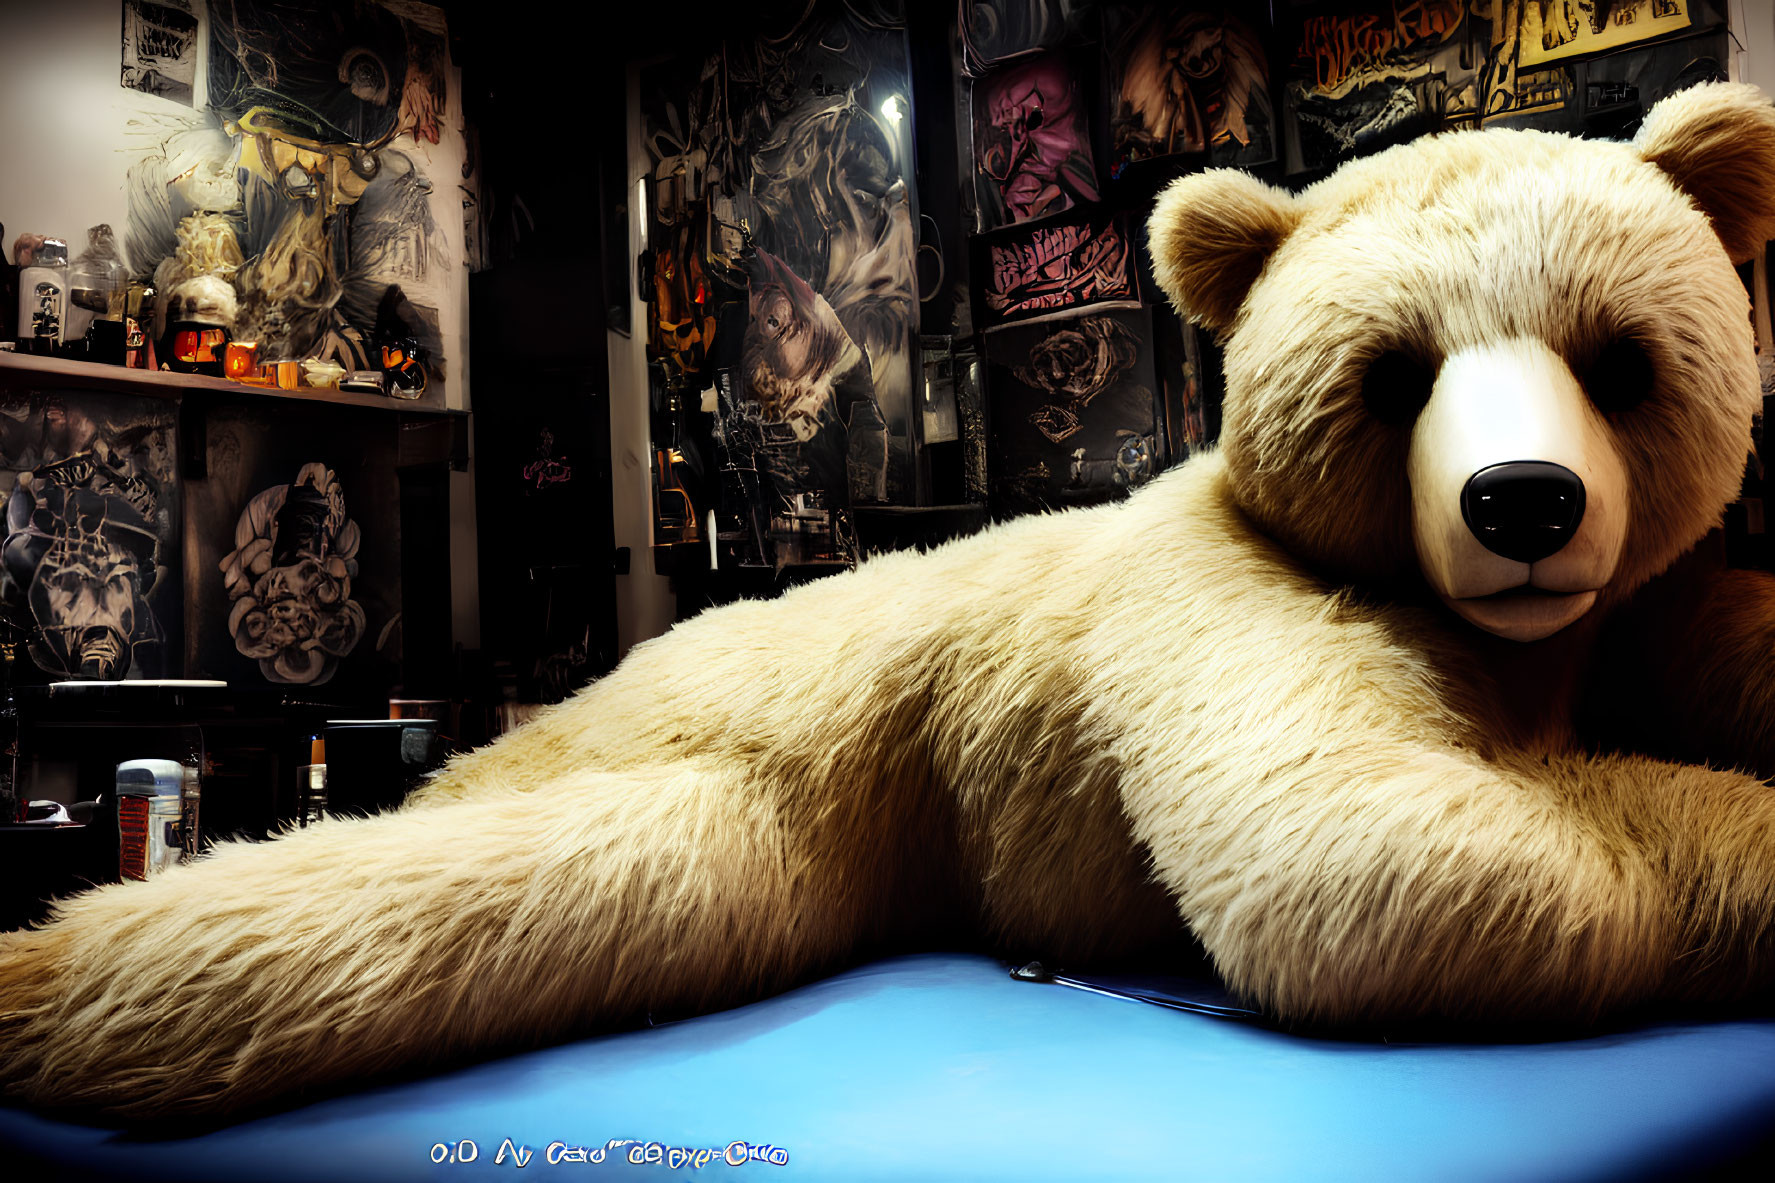 Plush Teddy Bear Surrounded by Graffiti Art and Items